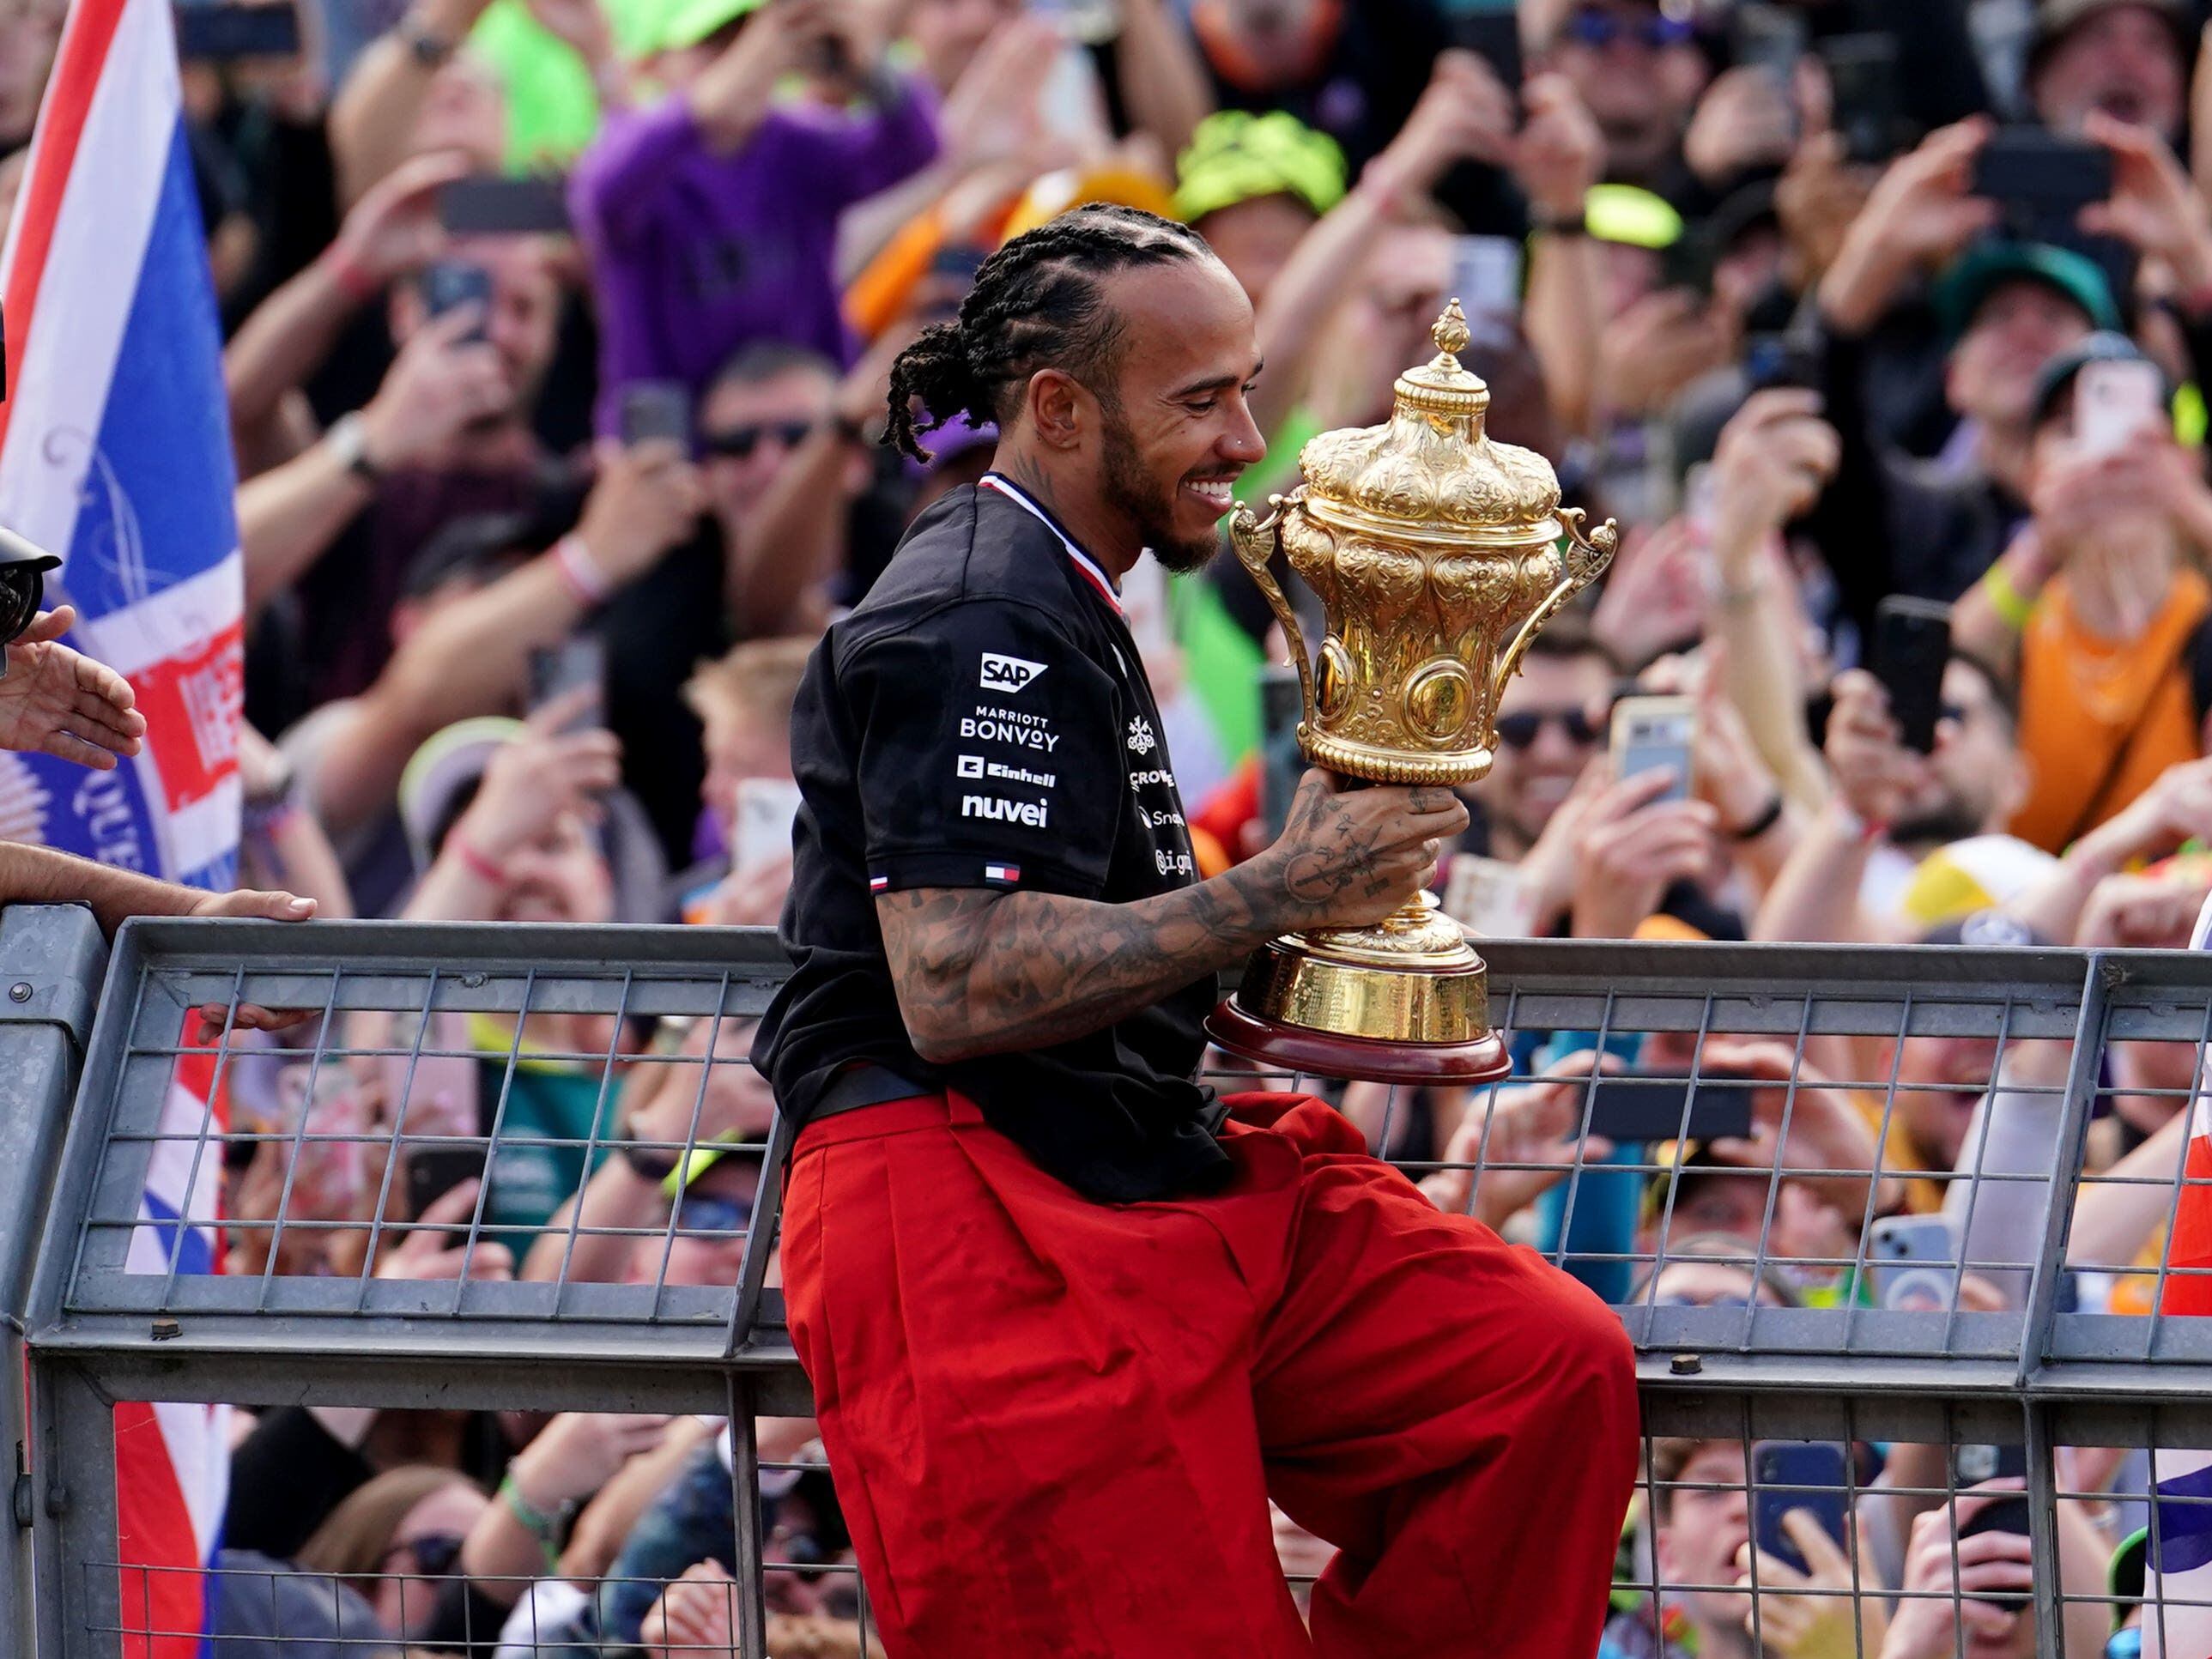 Lewis Hamilton emotional after going from ‘bottom of barrel’ to British GP glory